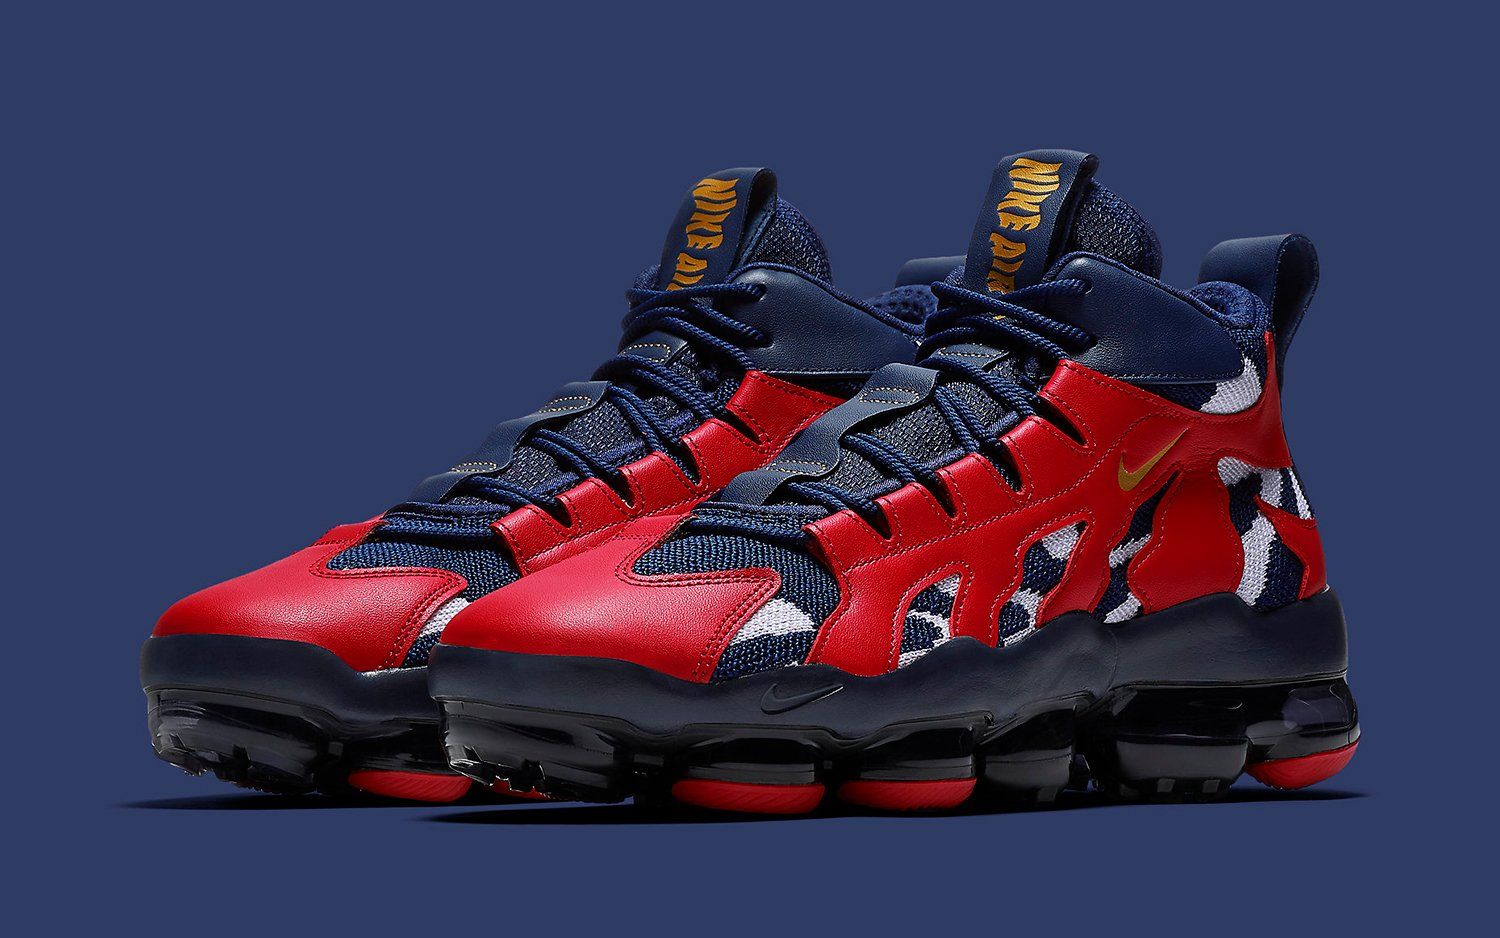 Olympic-Themed Nike VaporMax Gliese is 